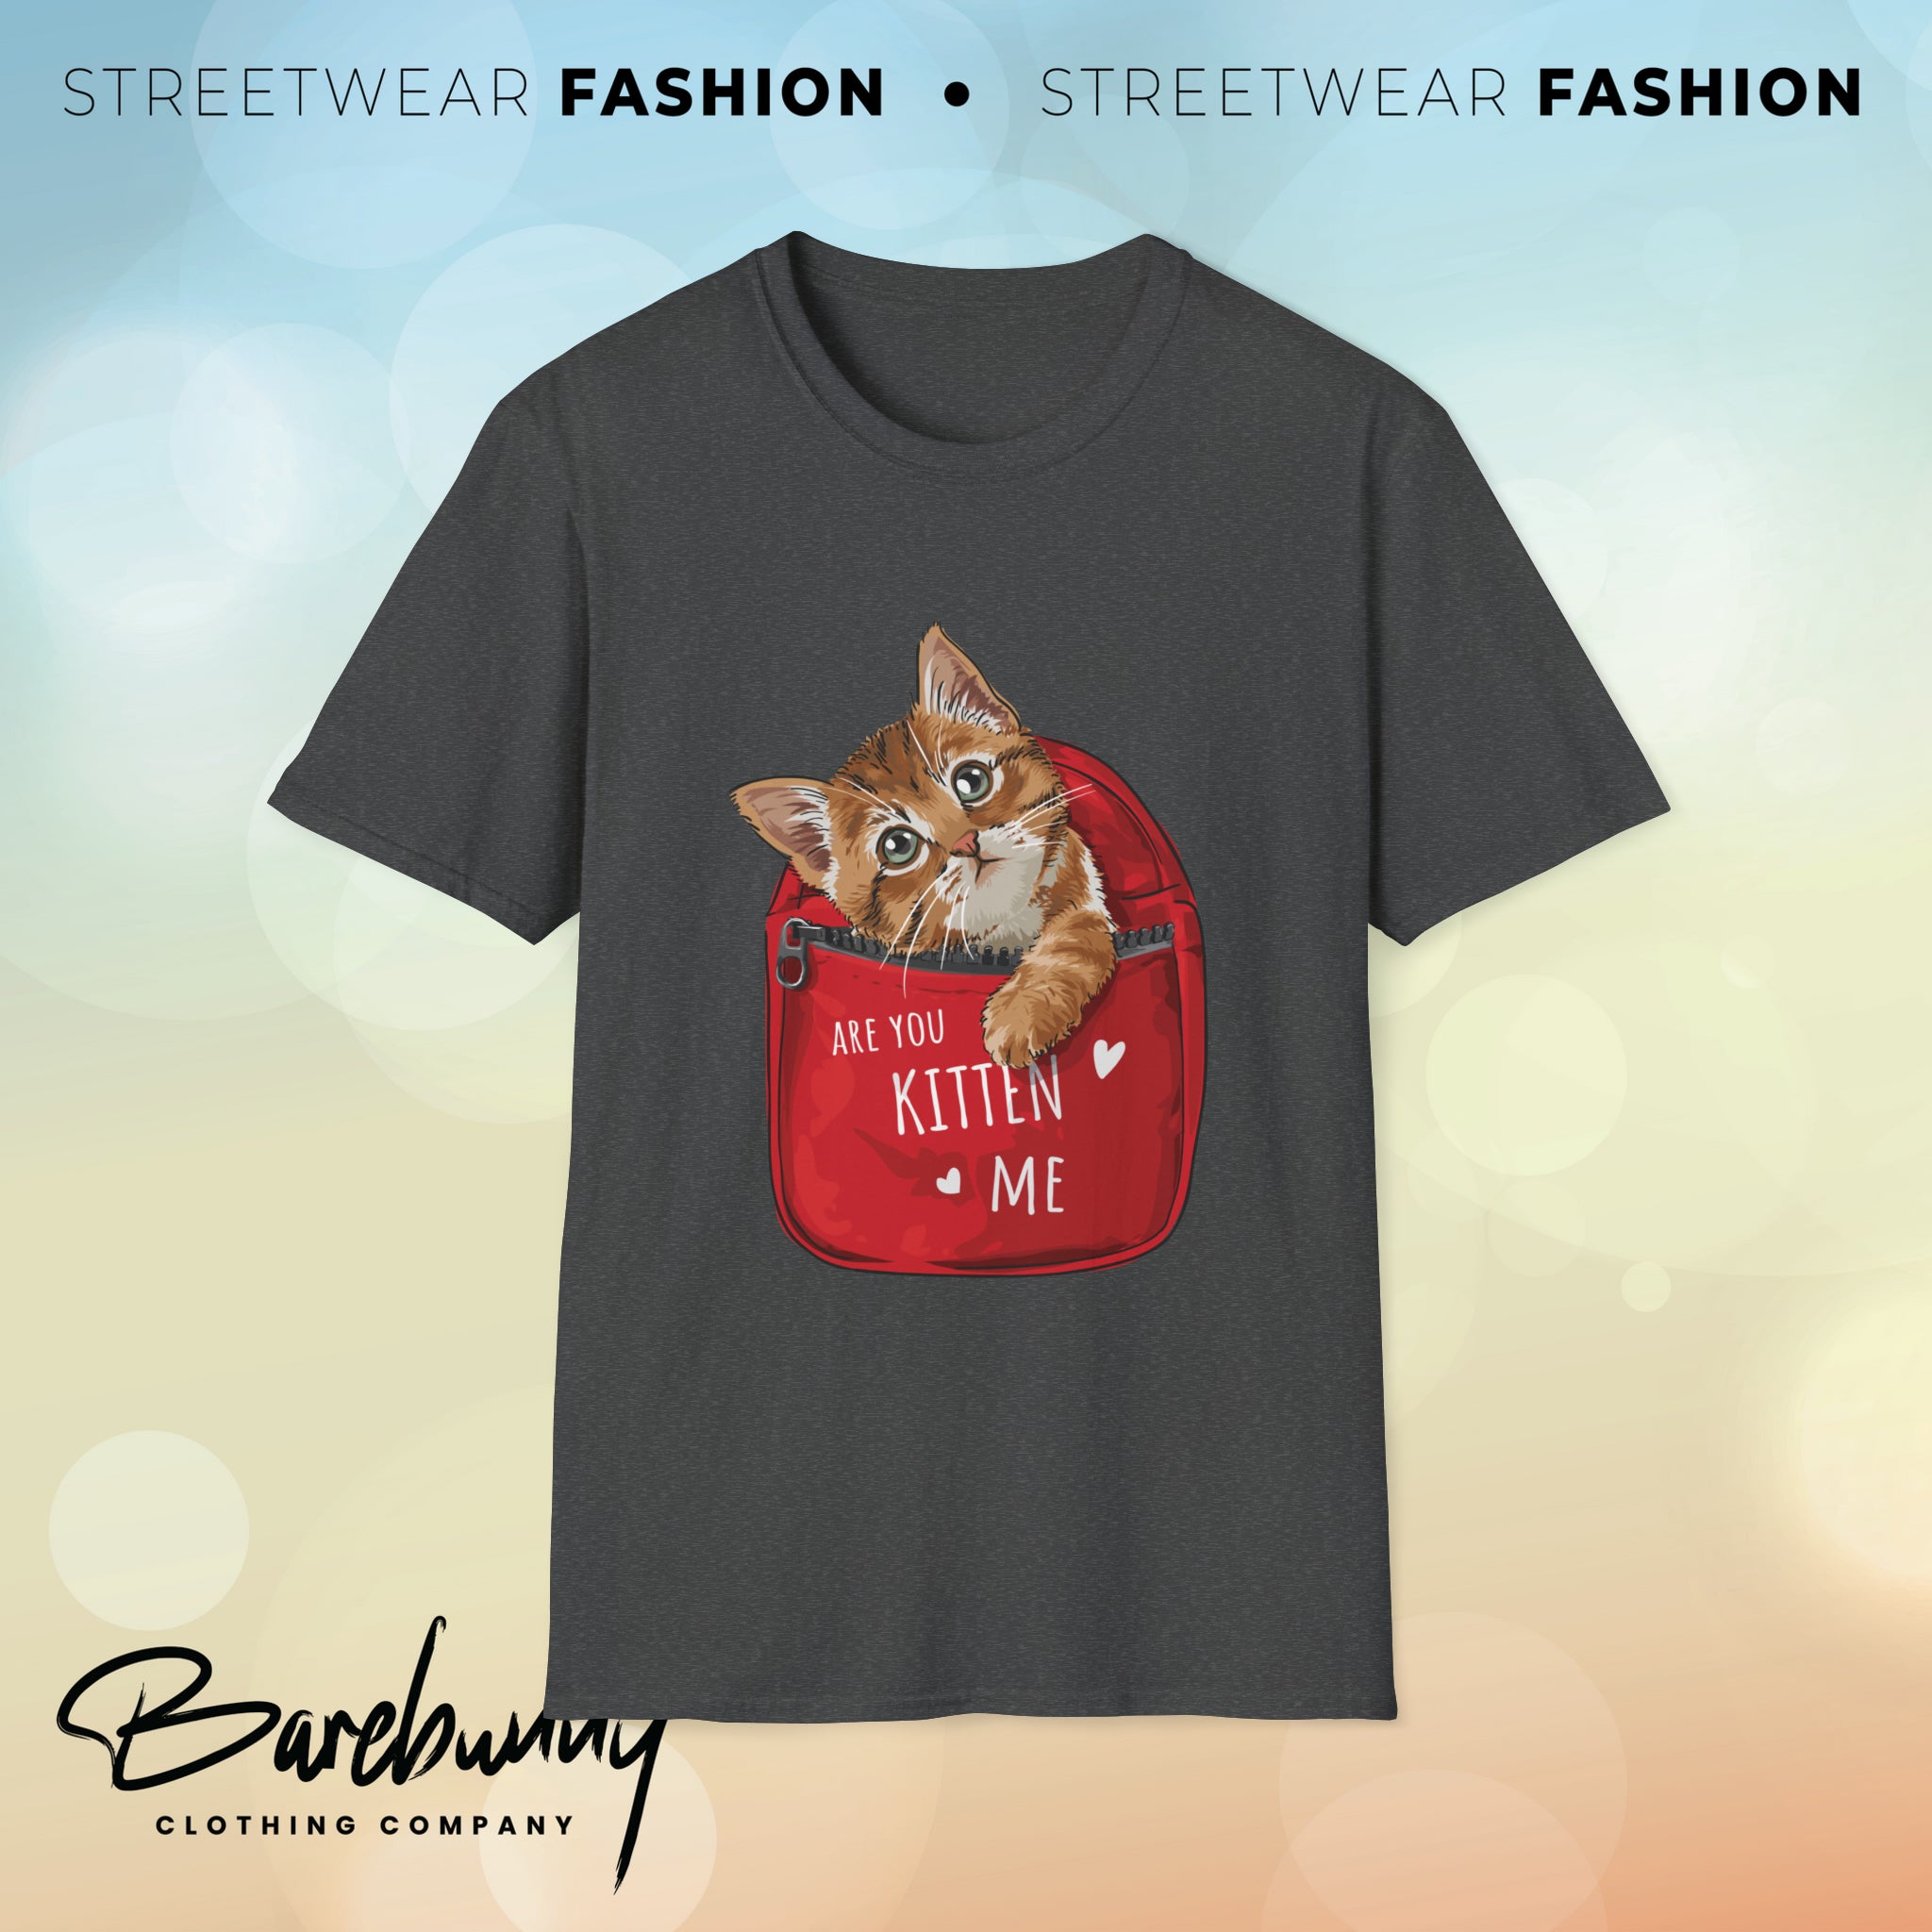 Are you kitten me - Unisex Softstyle T-Shirt (DTF)